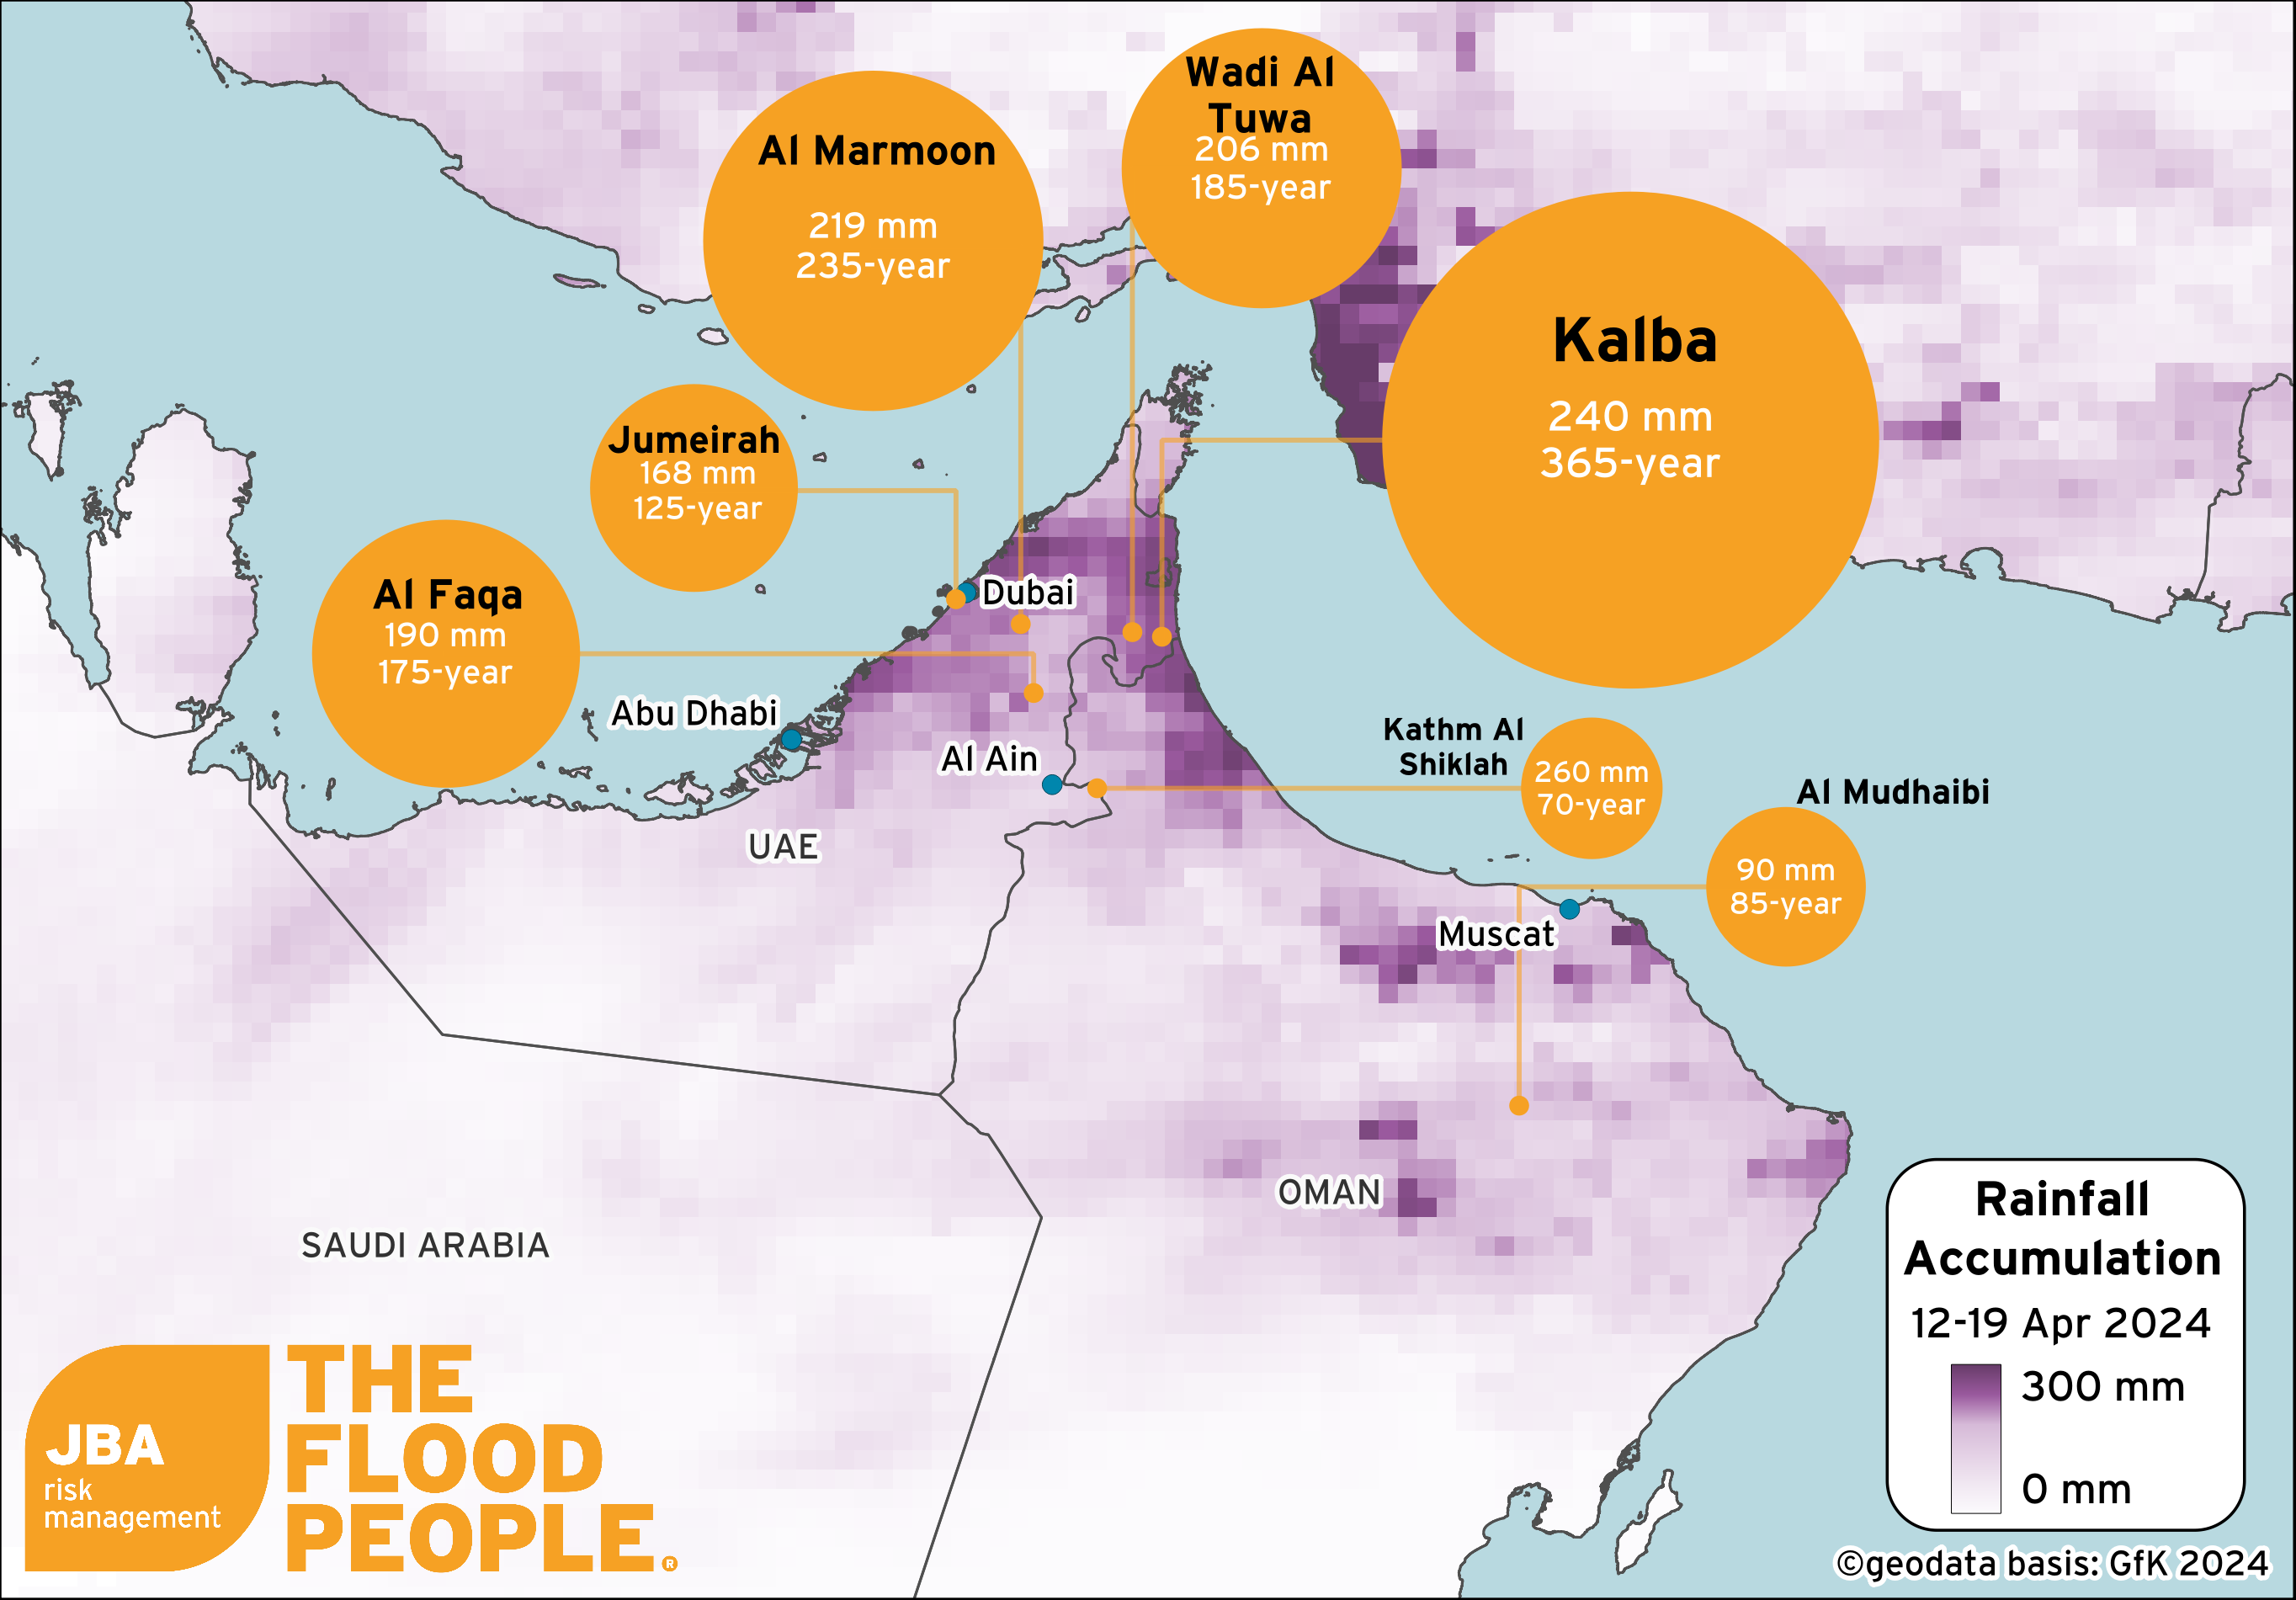 A map of UAE and Oman with rainfall accumulation data